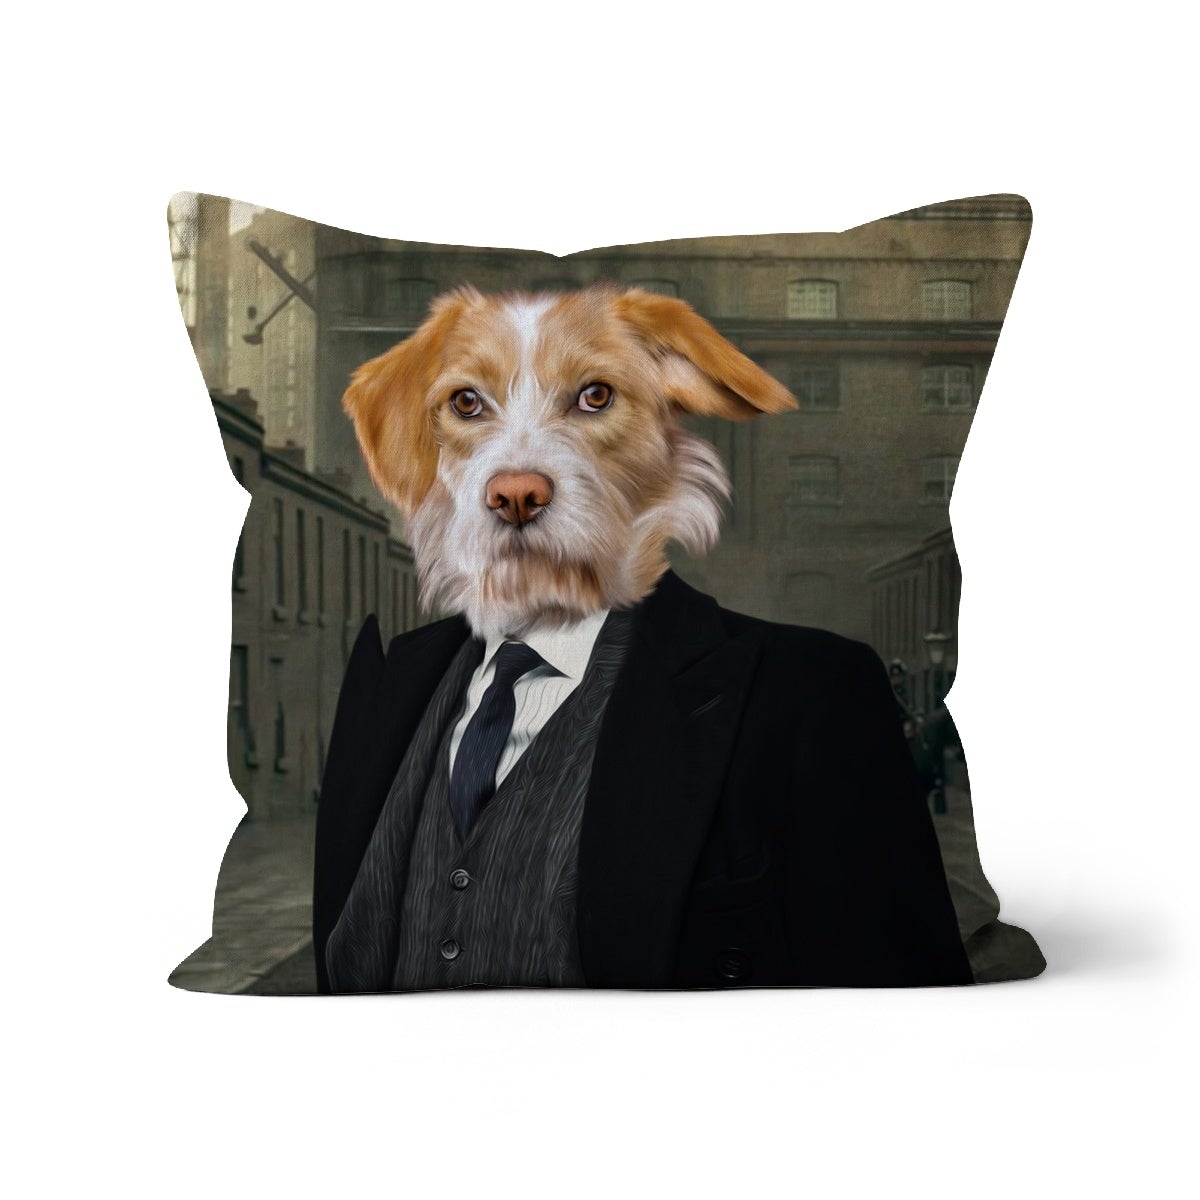 The Big Bro (Peaky Blinders Inspired): Custom Pet Cushion - Paw & Glory,pawandglory,pet face pillows, personalised pet pillows, pillows with dogs picture, custom pet pillows, pet print pillow